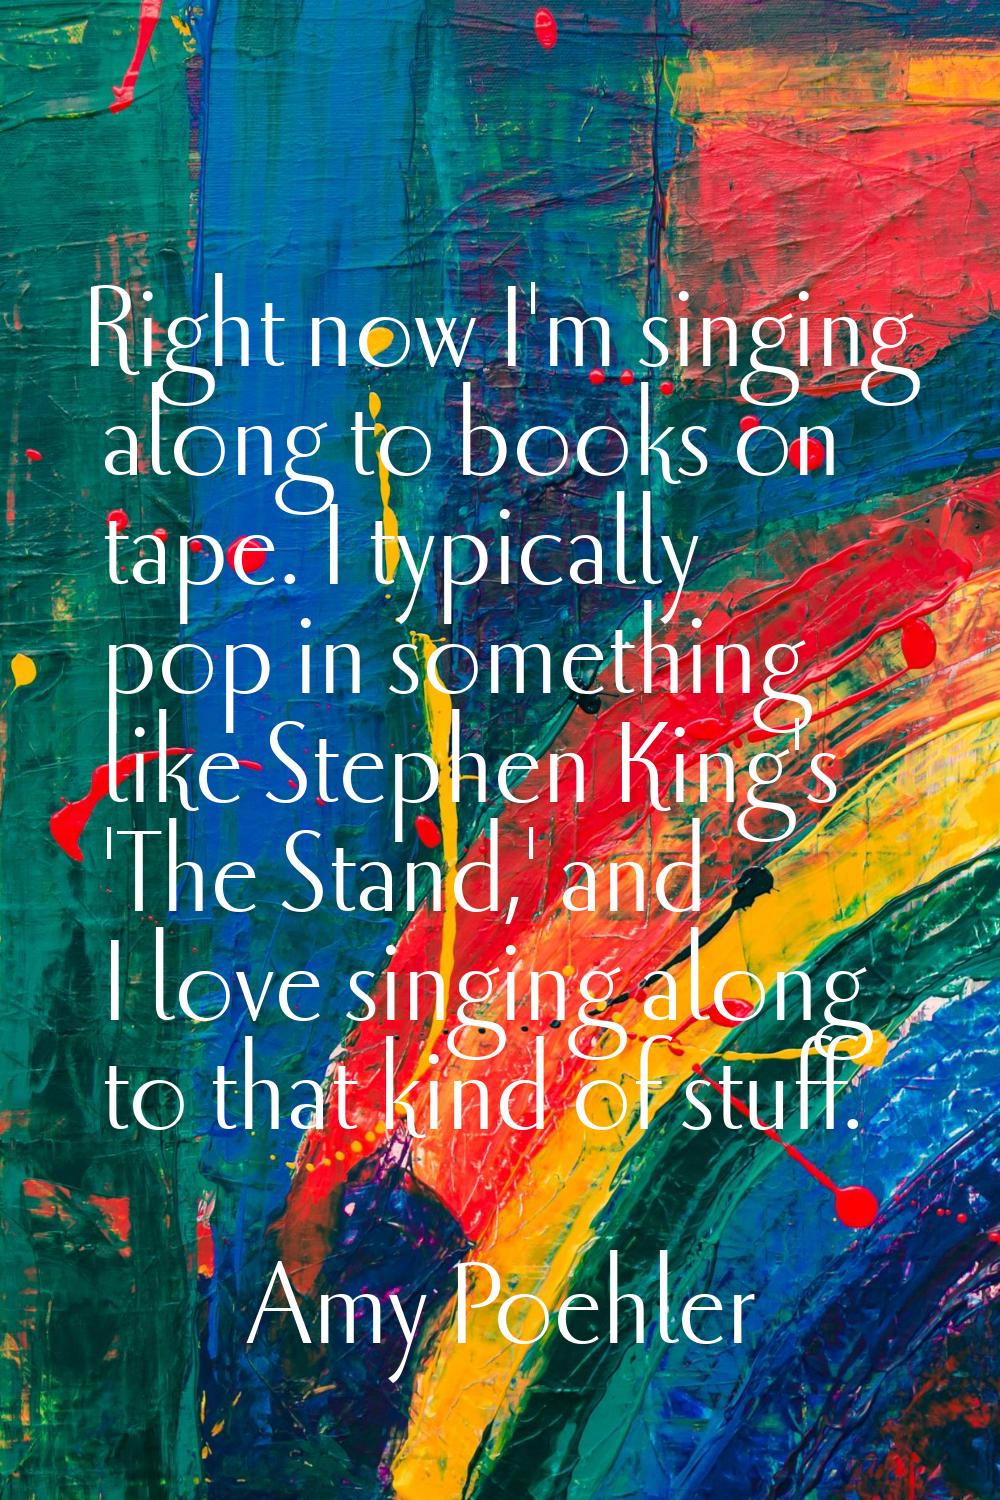 Right now I'm singing along to books on tape. I typically pop in something like Stephen King's 'The